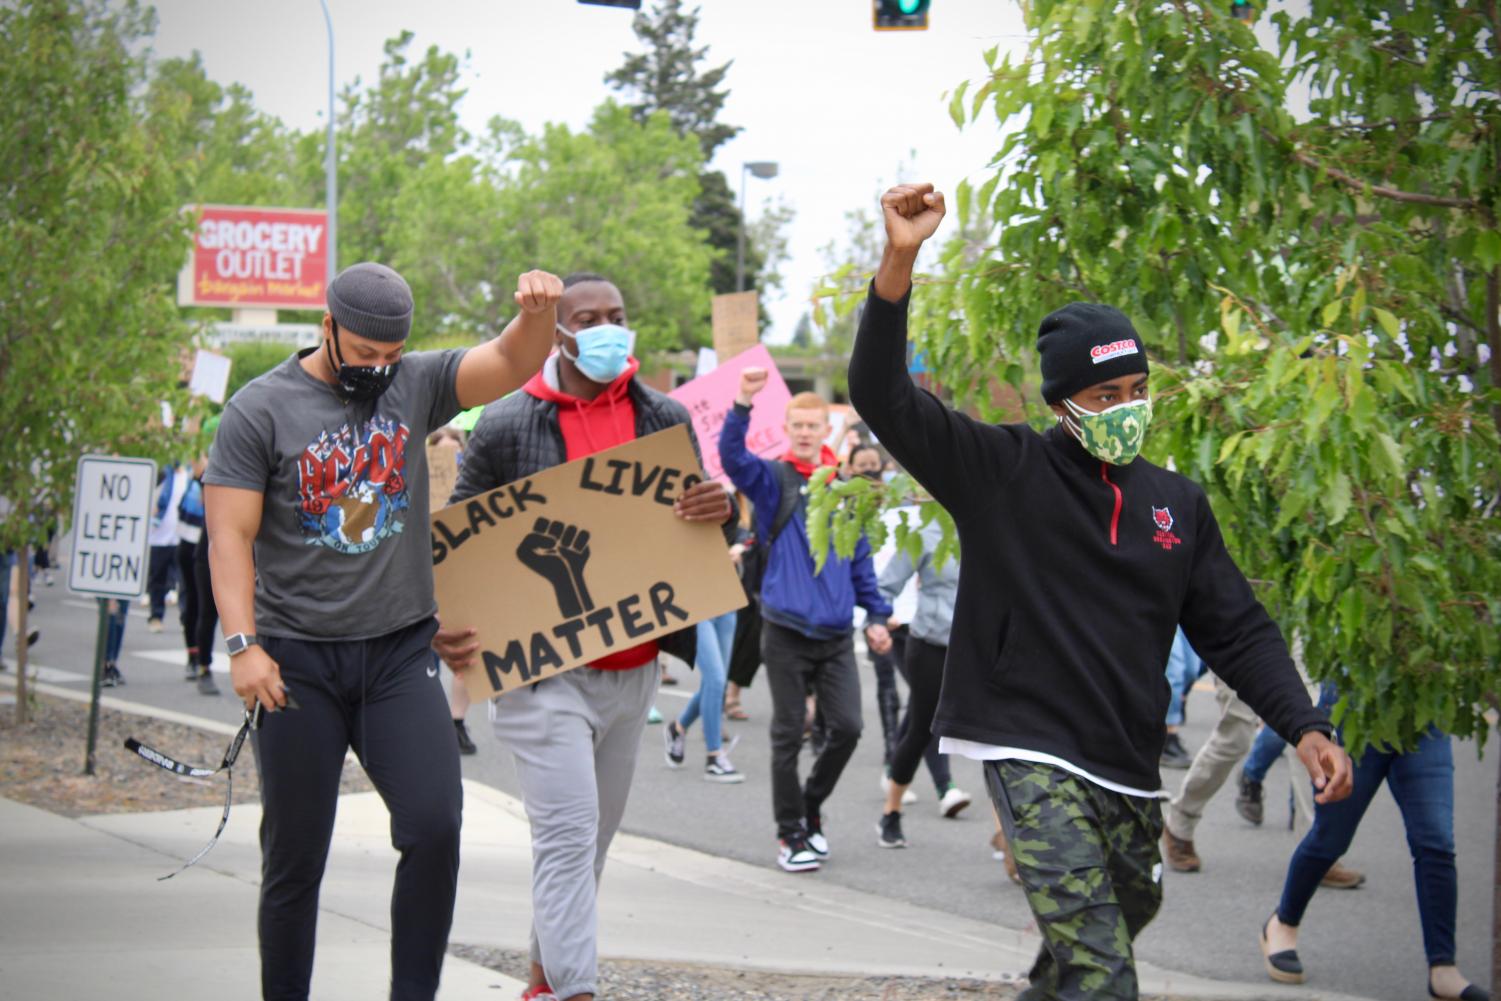 Protesters+continue+to+rally+in+Ellensburg%2C+despite+fears+of+violence